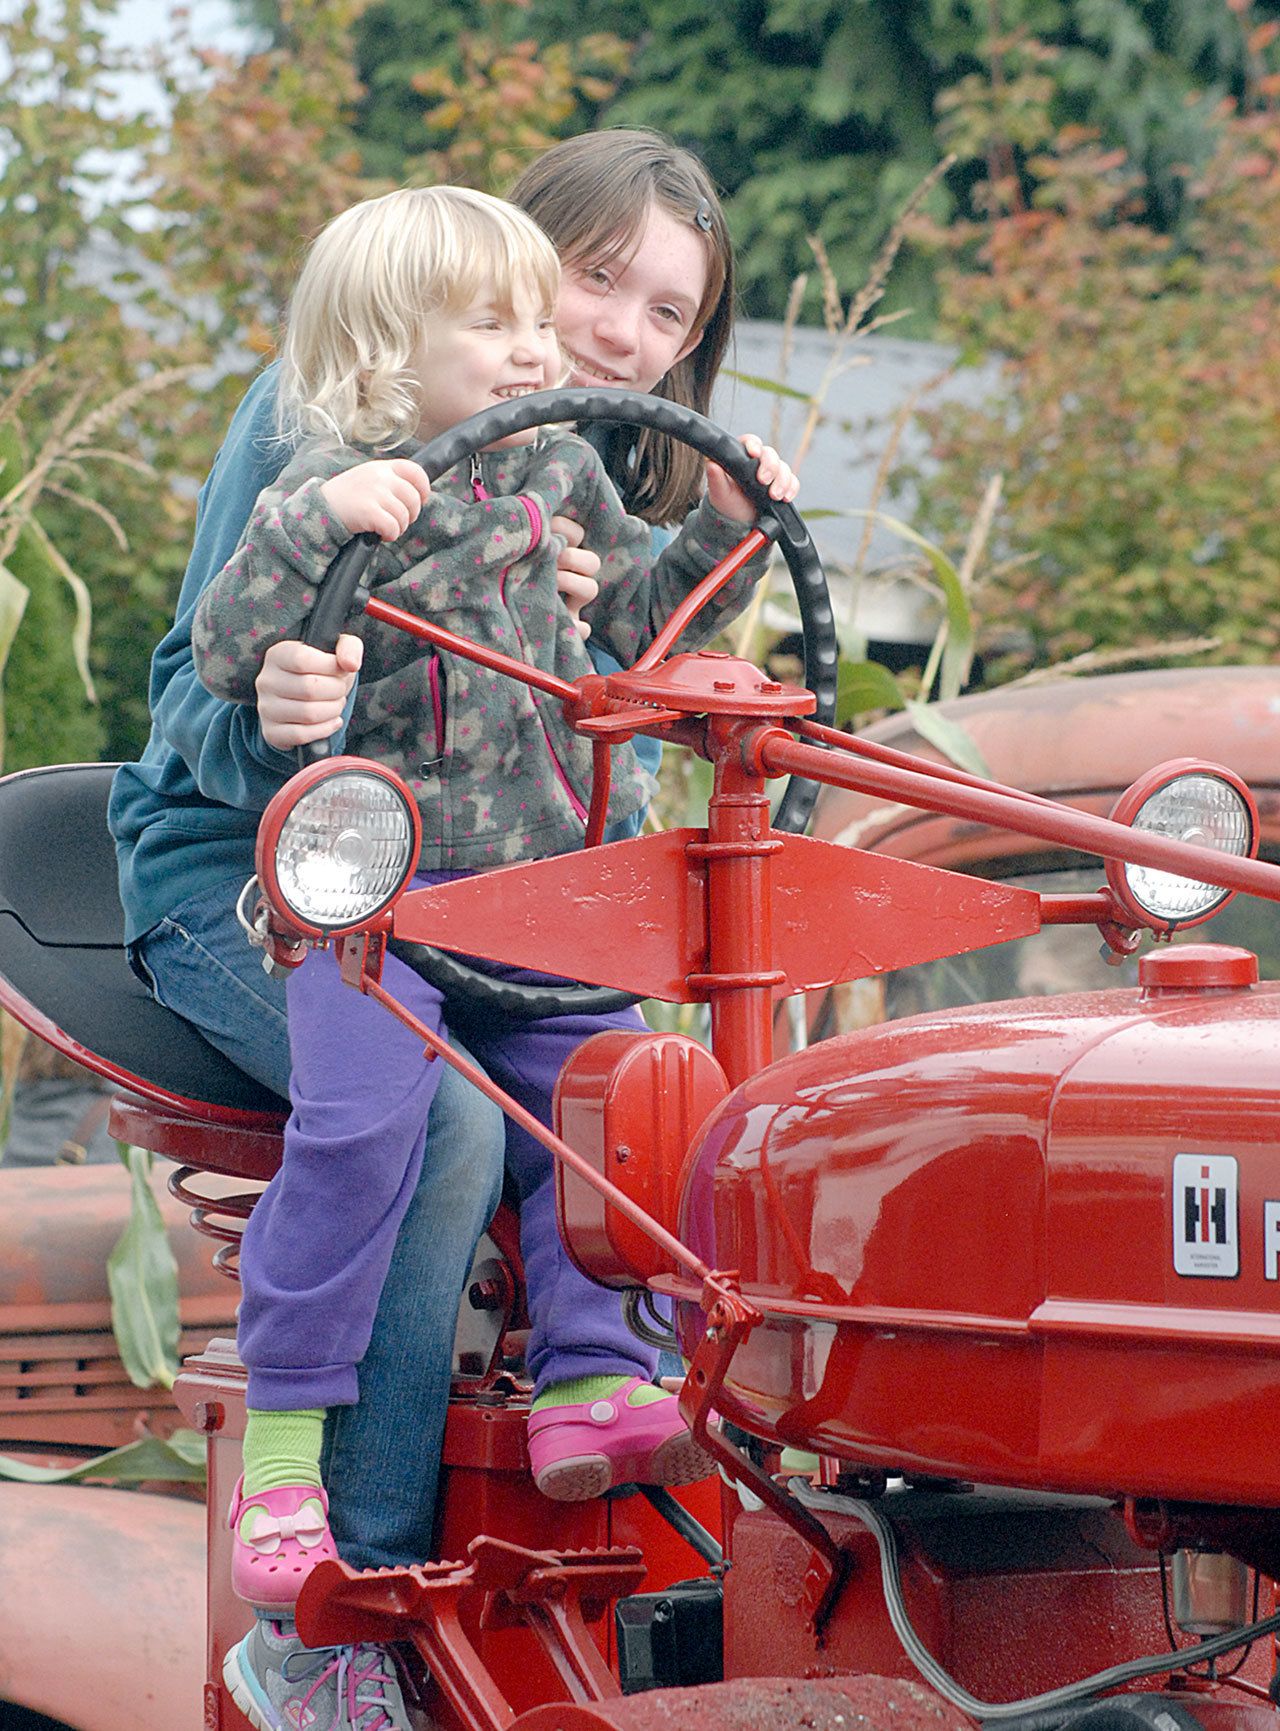 Madisyn Heistand, 10, and Abigaile Heistand, 3, both of Port Angeles, sit at the controls of an antique tractor at Agnew Grocery on Saturday. The grocery was one of seven farms and businesses taking part in the 20th annual Clallam County Farm Tour, a celebration of the agricultural heritage of the Dungeness Valley. (Keith Thorpe/Peninsula Daily News)